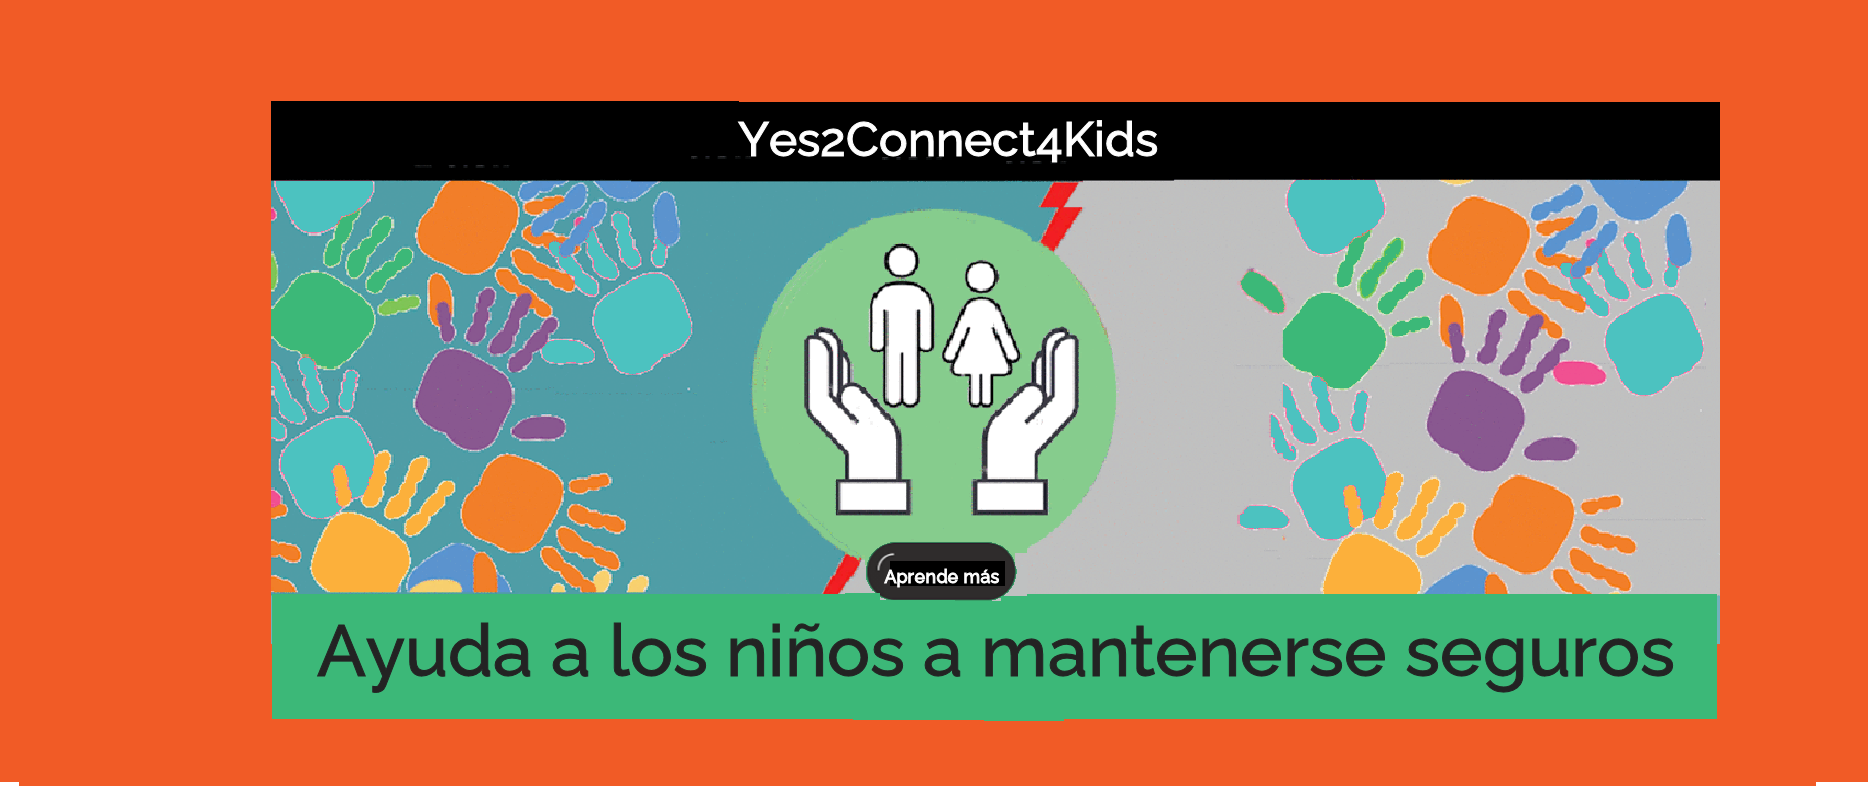 Yes2Connect4Kids